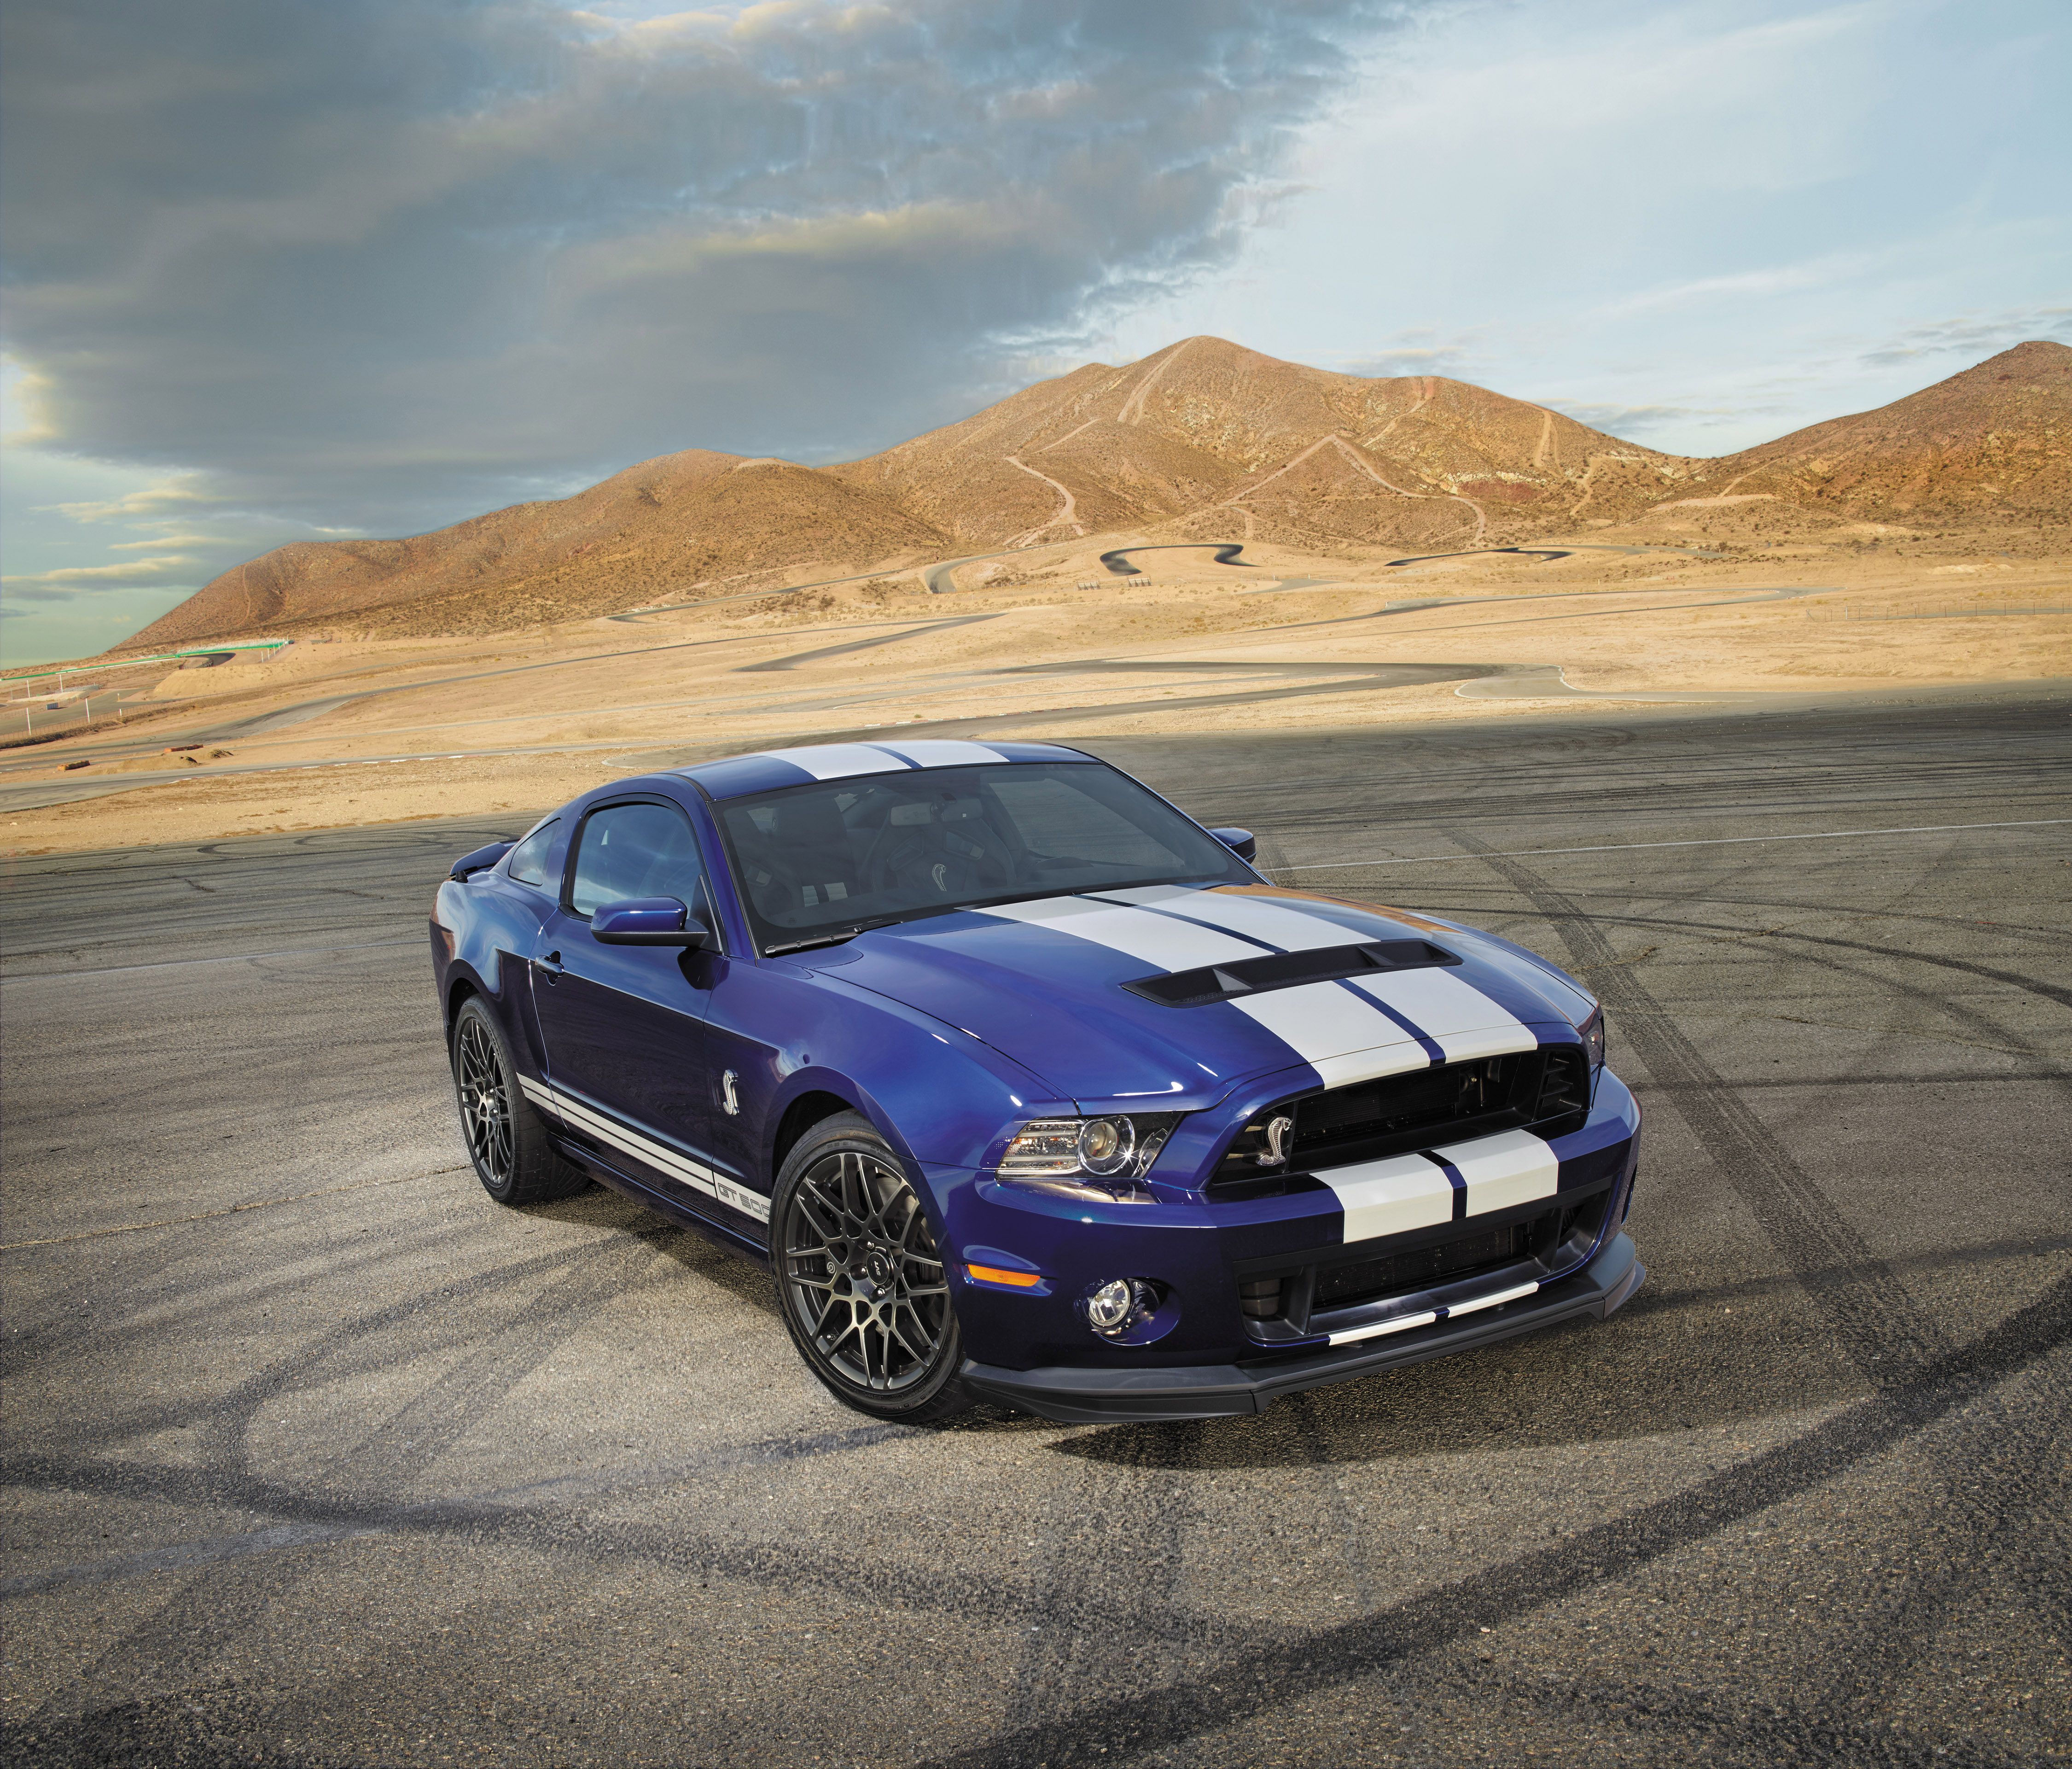 Purple Shelby GT500 parked on track.